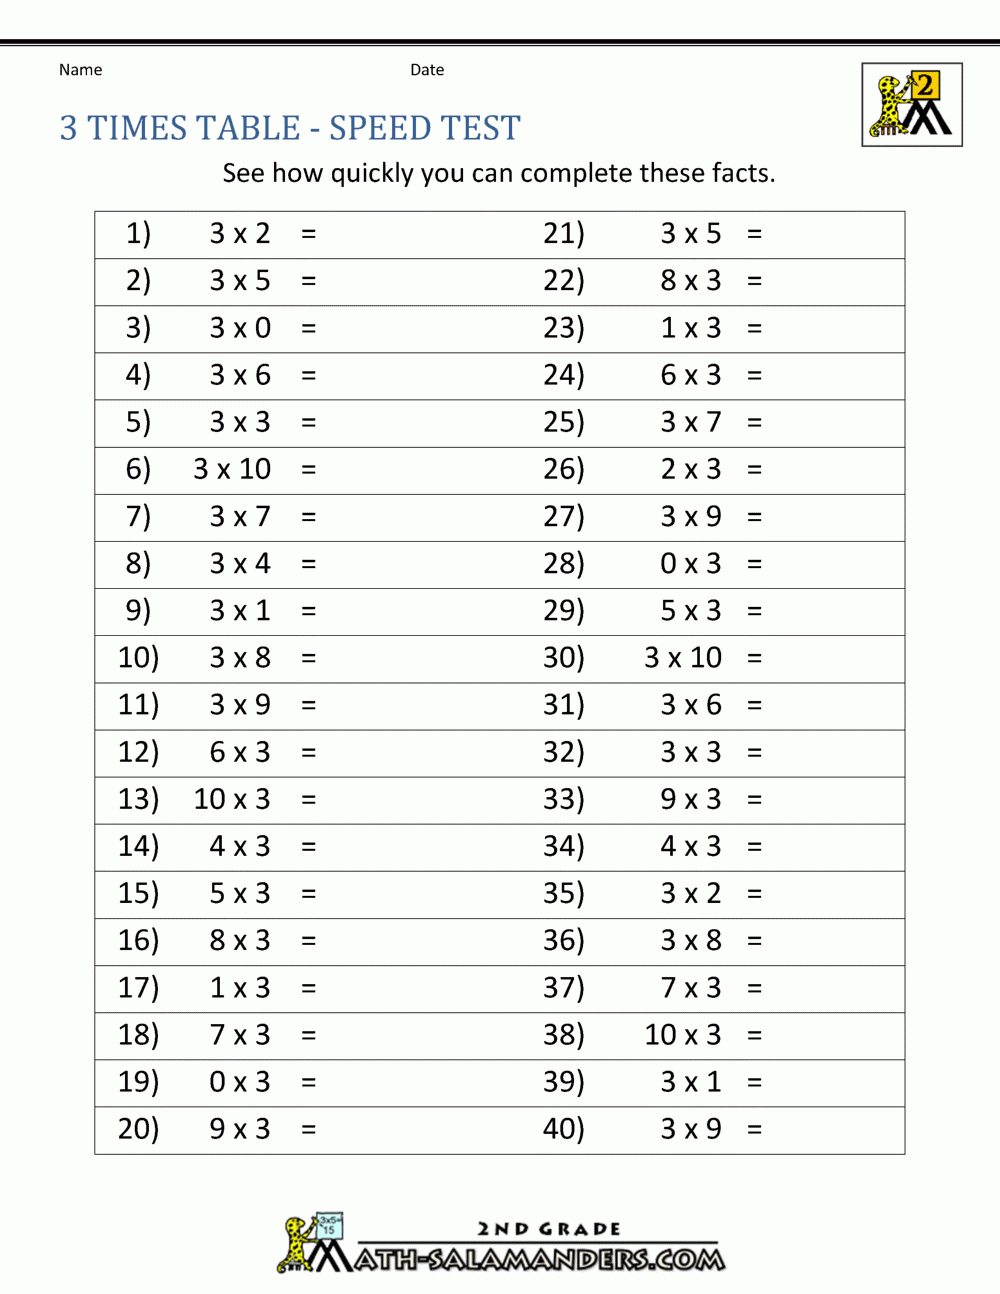 3 Times Table - 2Nd Grade Math Salamanders throughout Multiplication Worksheets 3 Times Tables